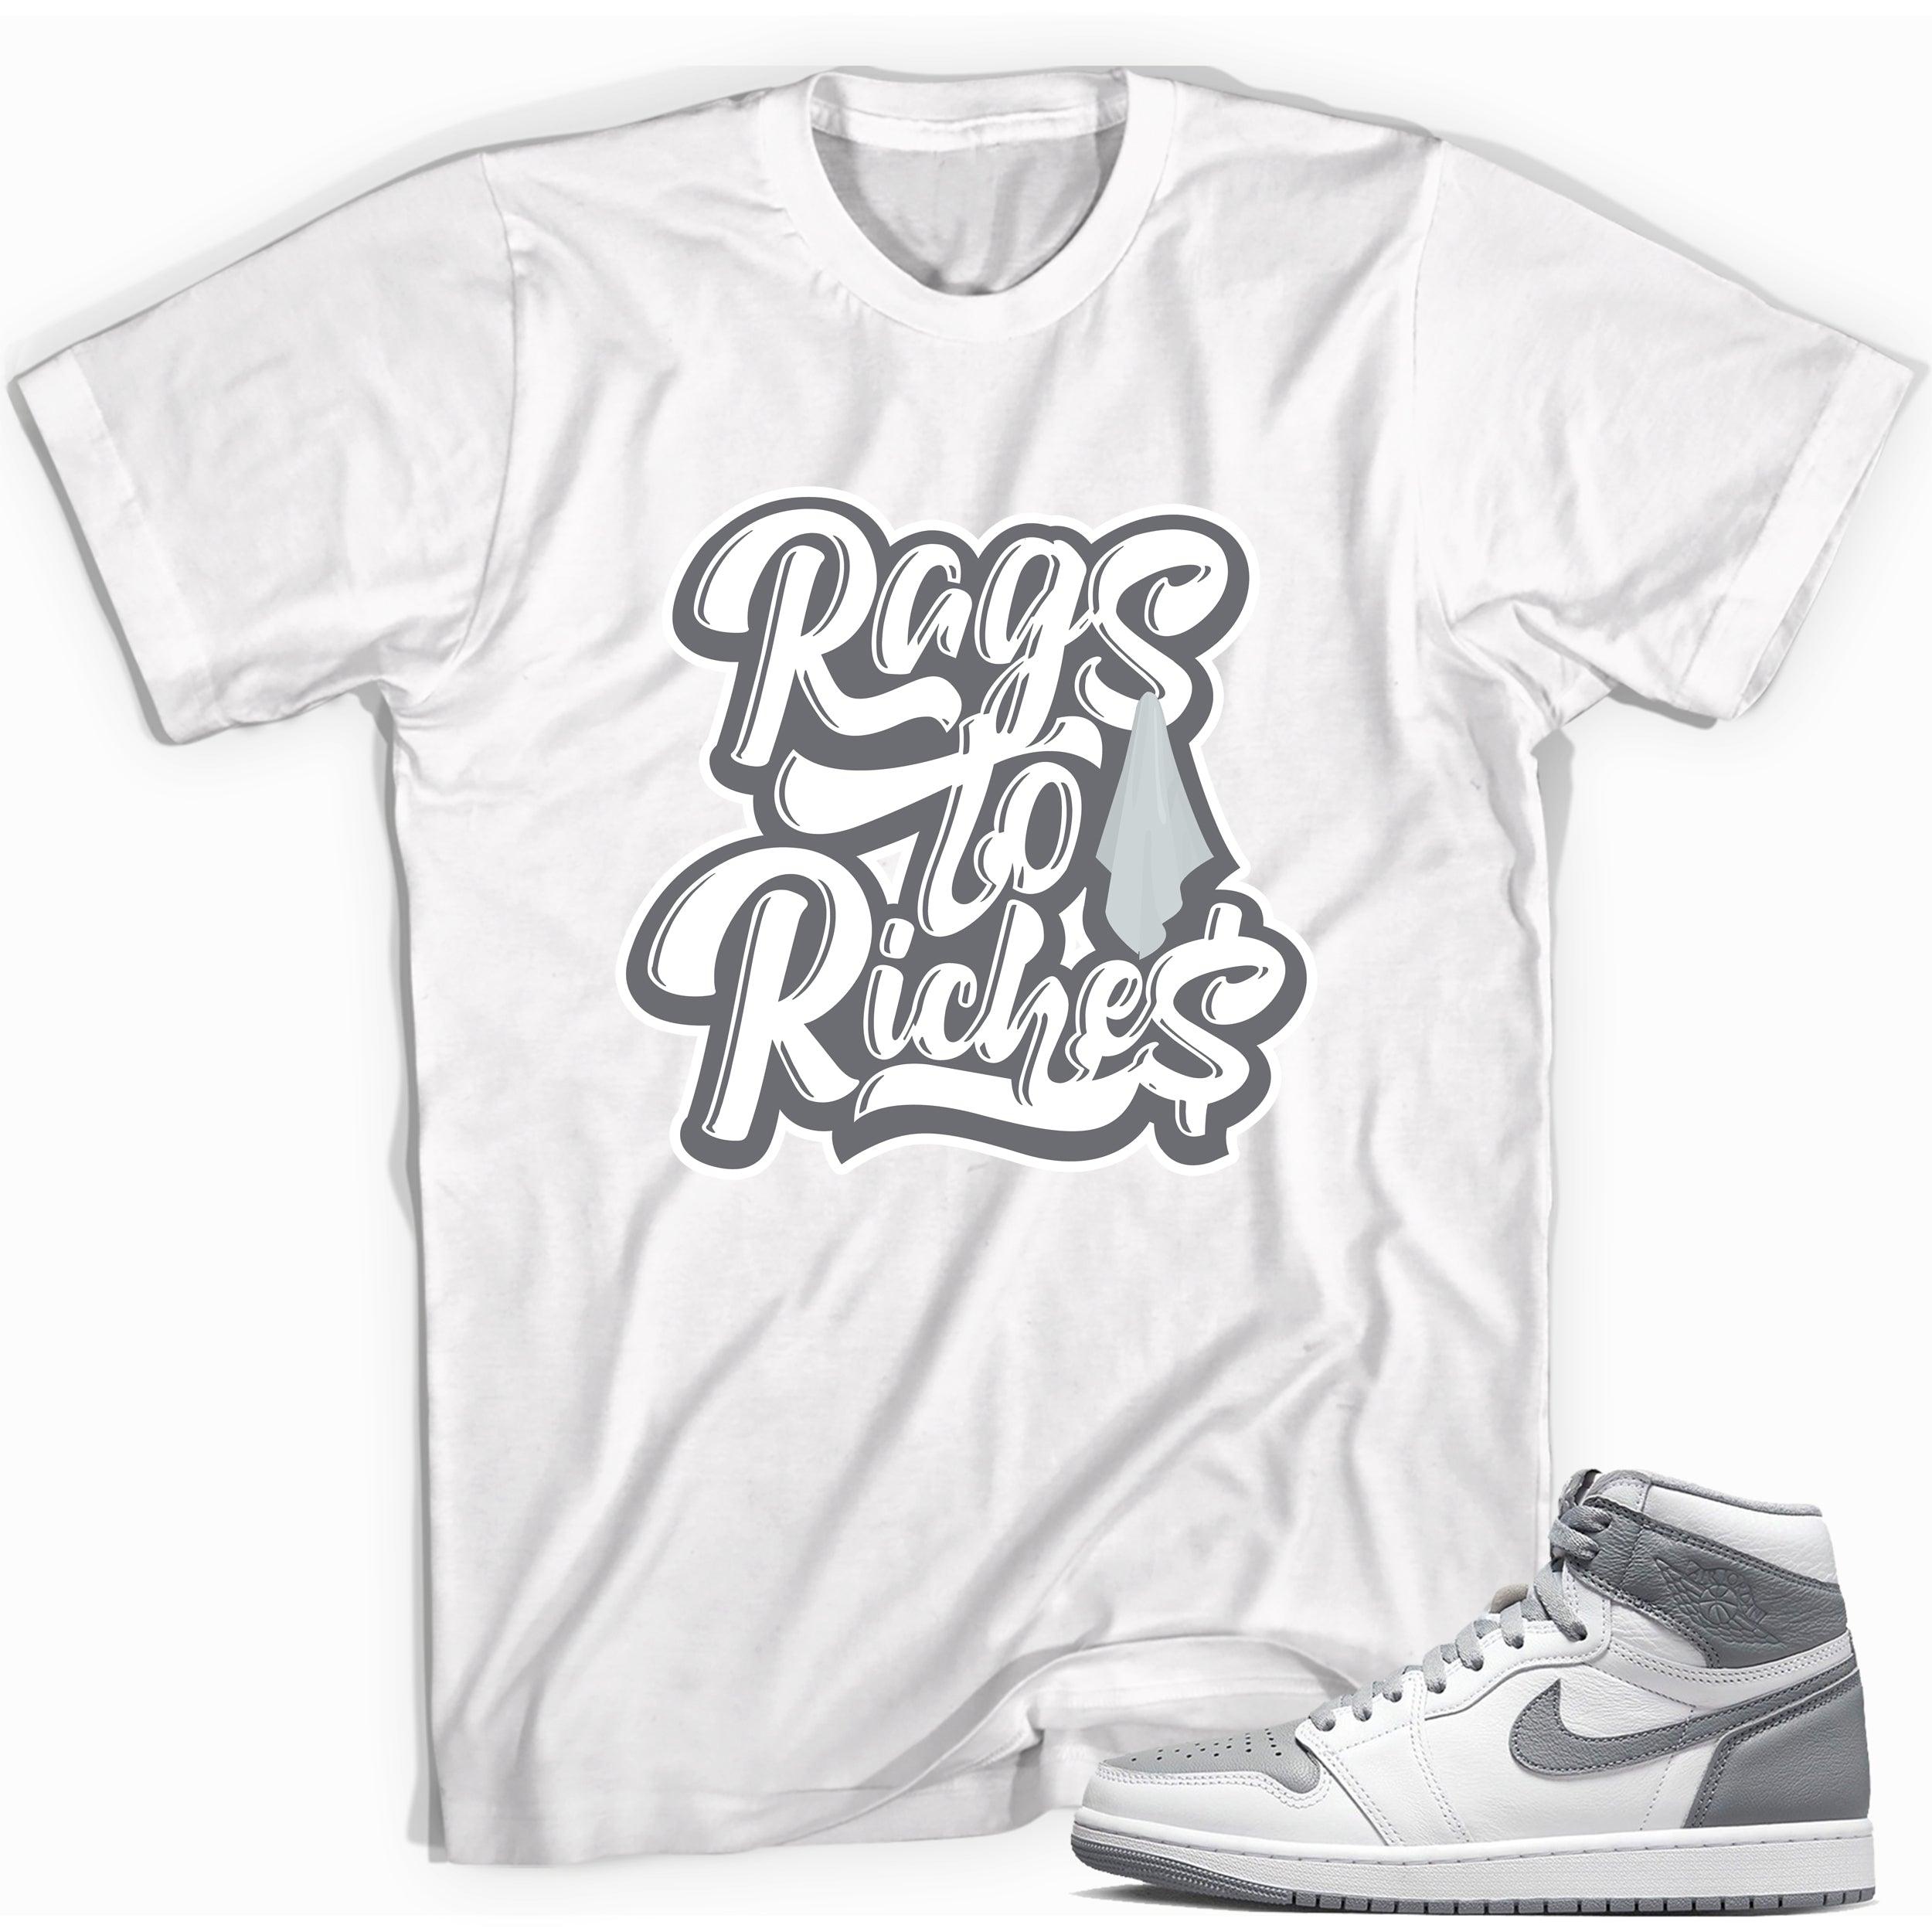 Rags to Riches Shirt for Jordan 1s photo